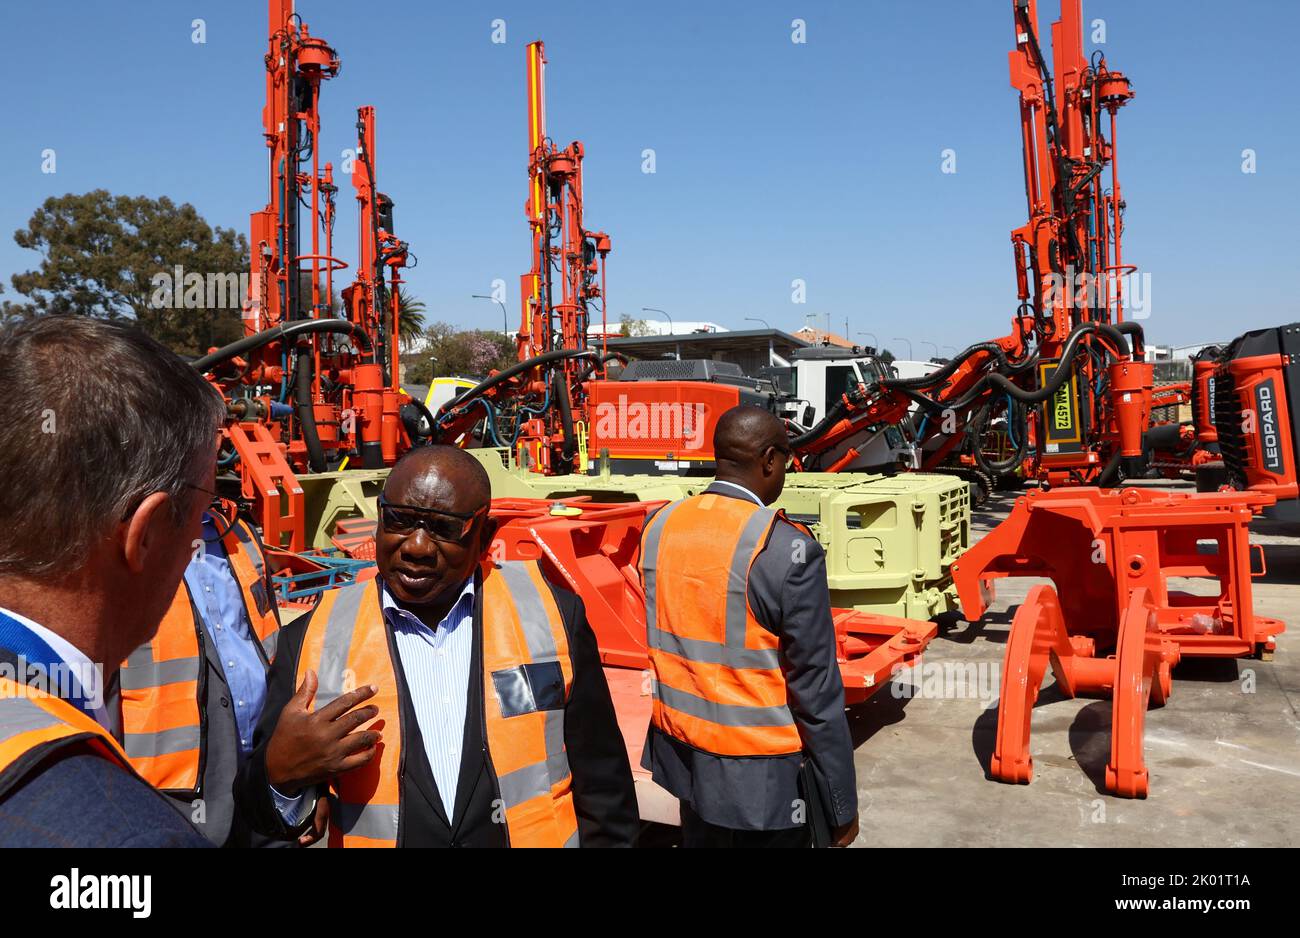 South Africa's President Cyril Ramaphosa gestures during the launch of the new Sandvik Khomanani manufacturing site, at Khomanani, in Kempton Park, Johannesburg, South Africa September 9, 2022. REUTERS/Siphiwe Sibeko Stock Photo